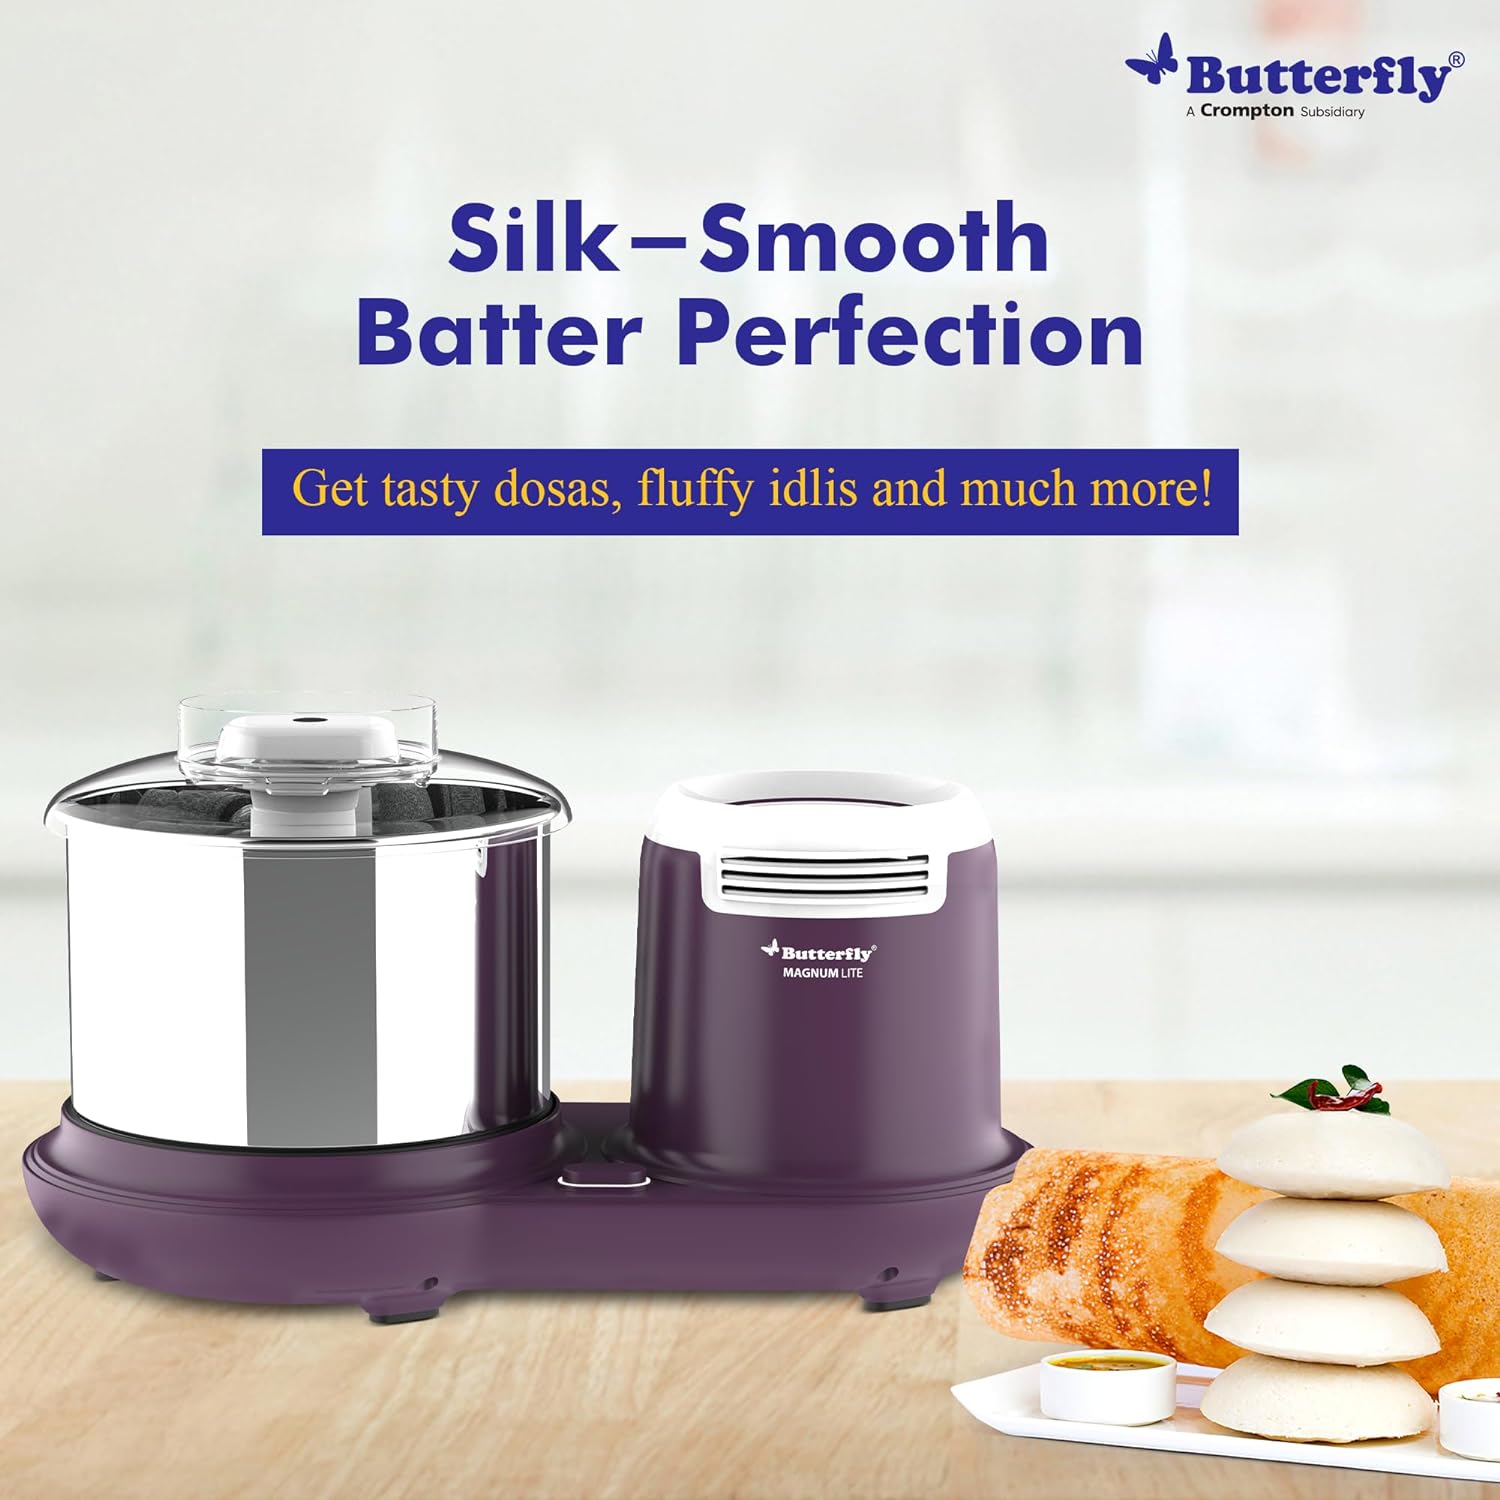 Butterfly Wet Grinder Magnum Lite 110-120 volts, 1.5 Litres, 230 watts (For use in USA and Canada only)